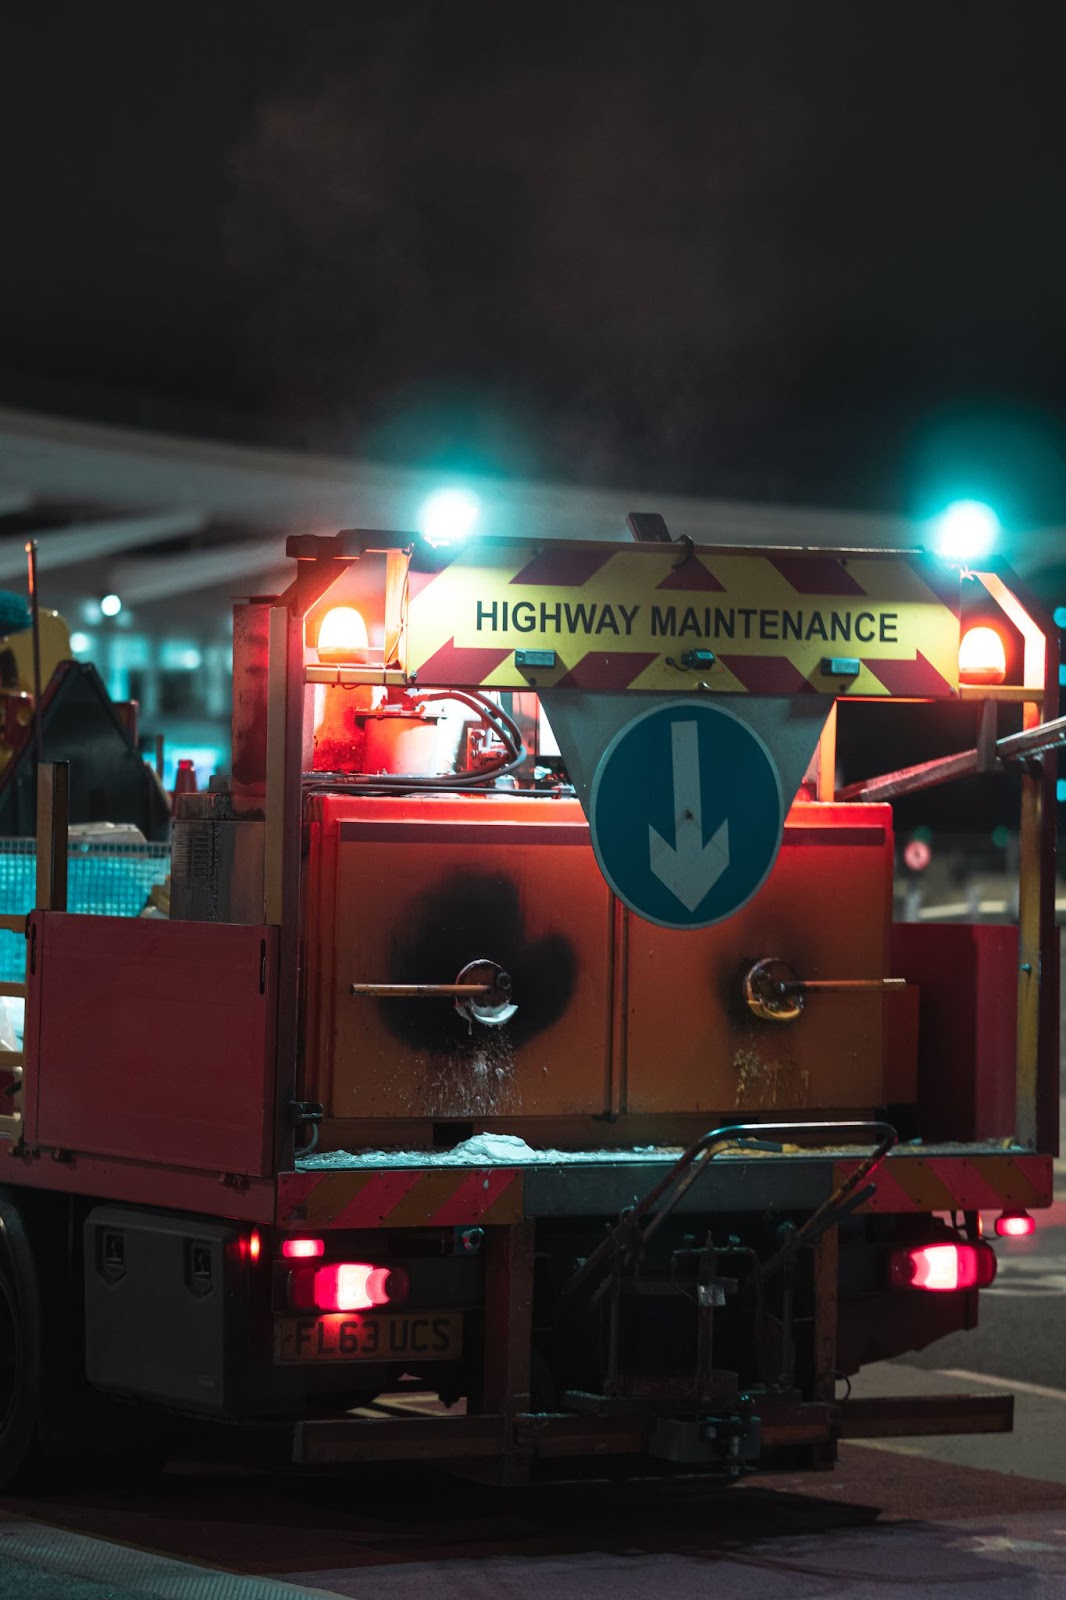 A highway maintenance truck with its lights on at night